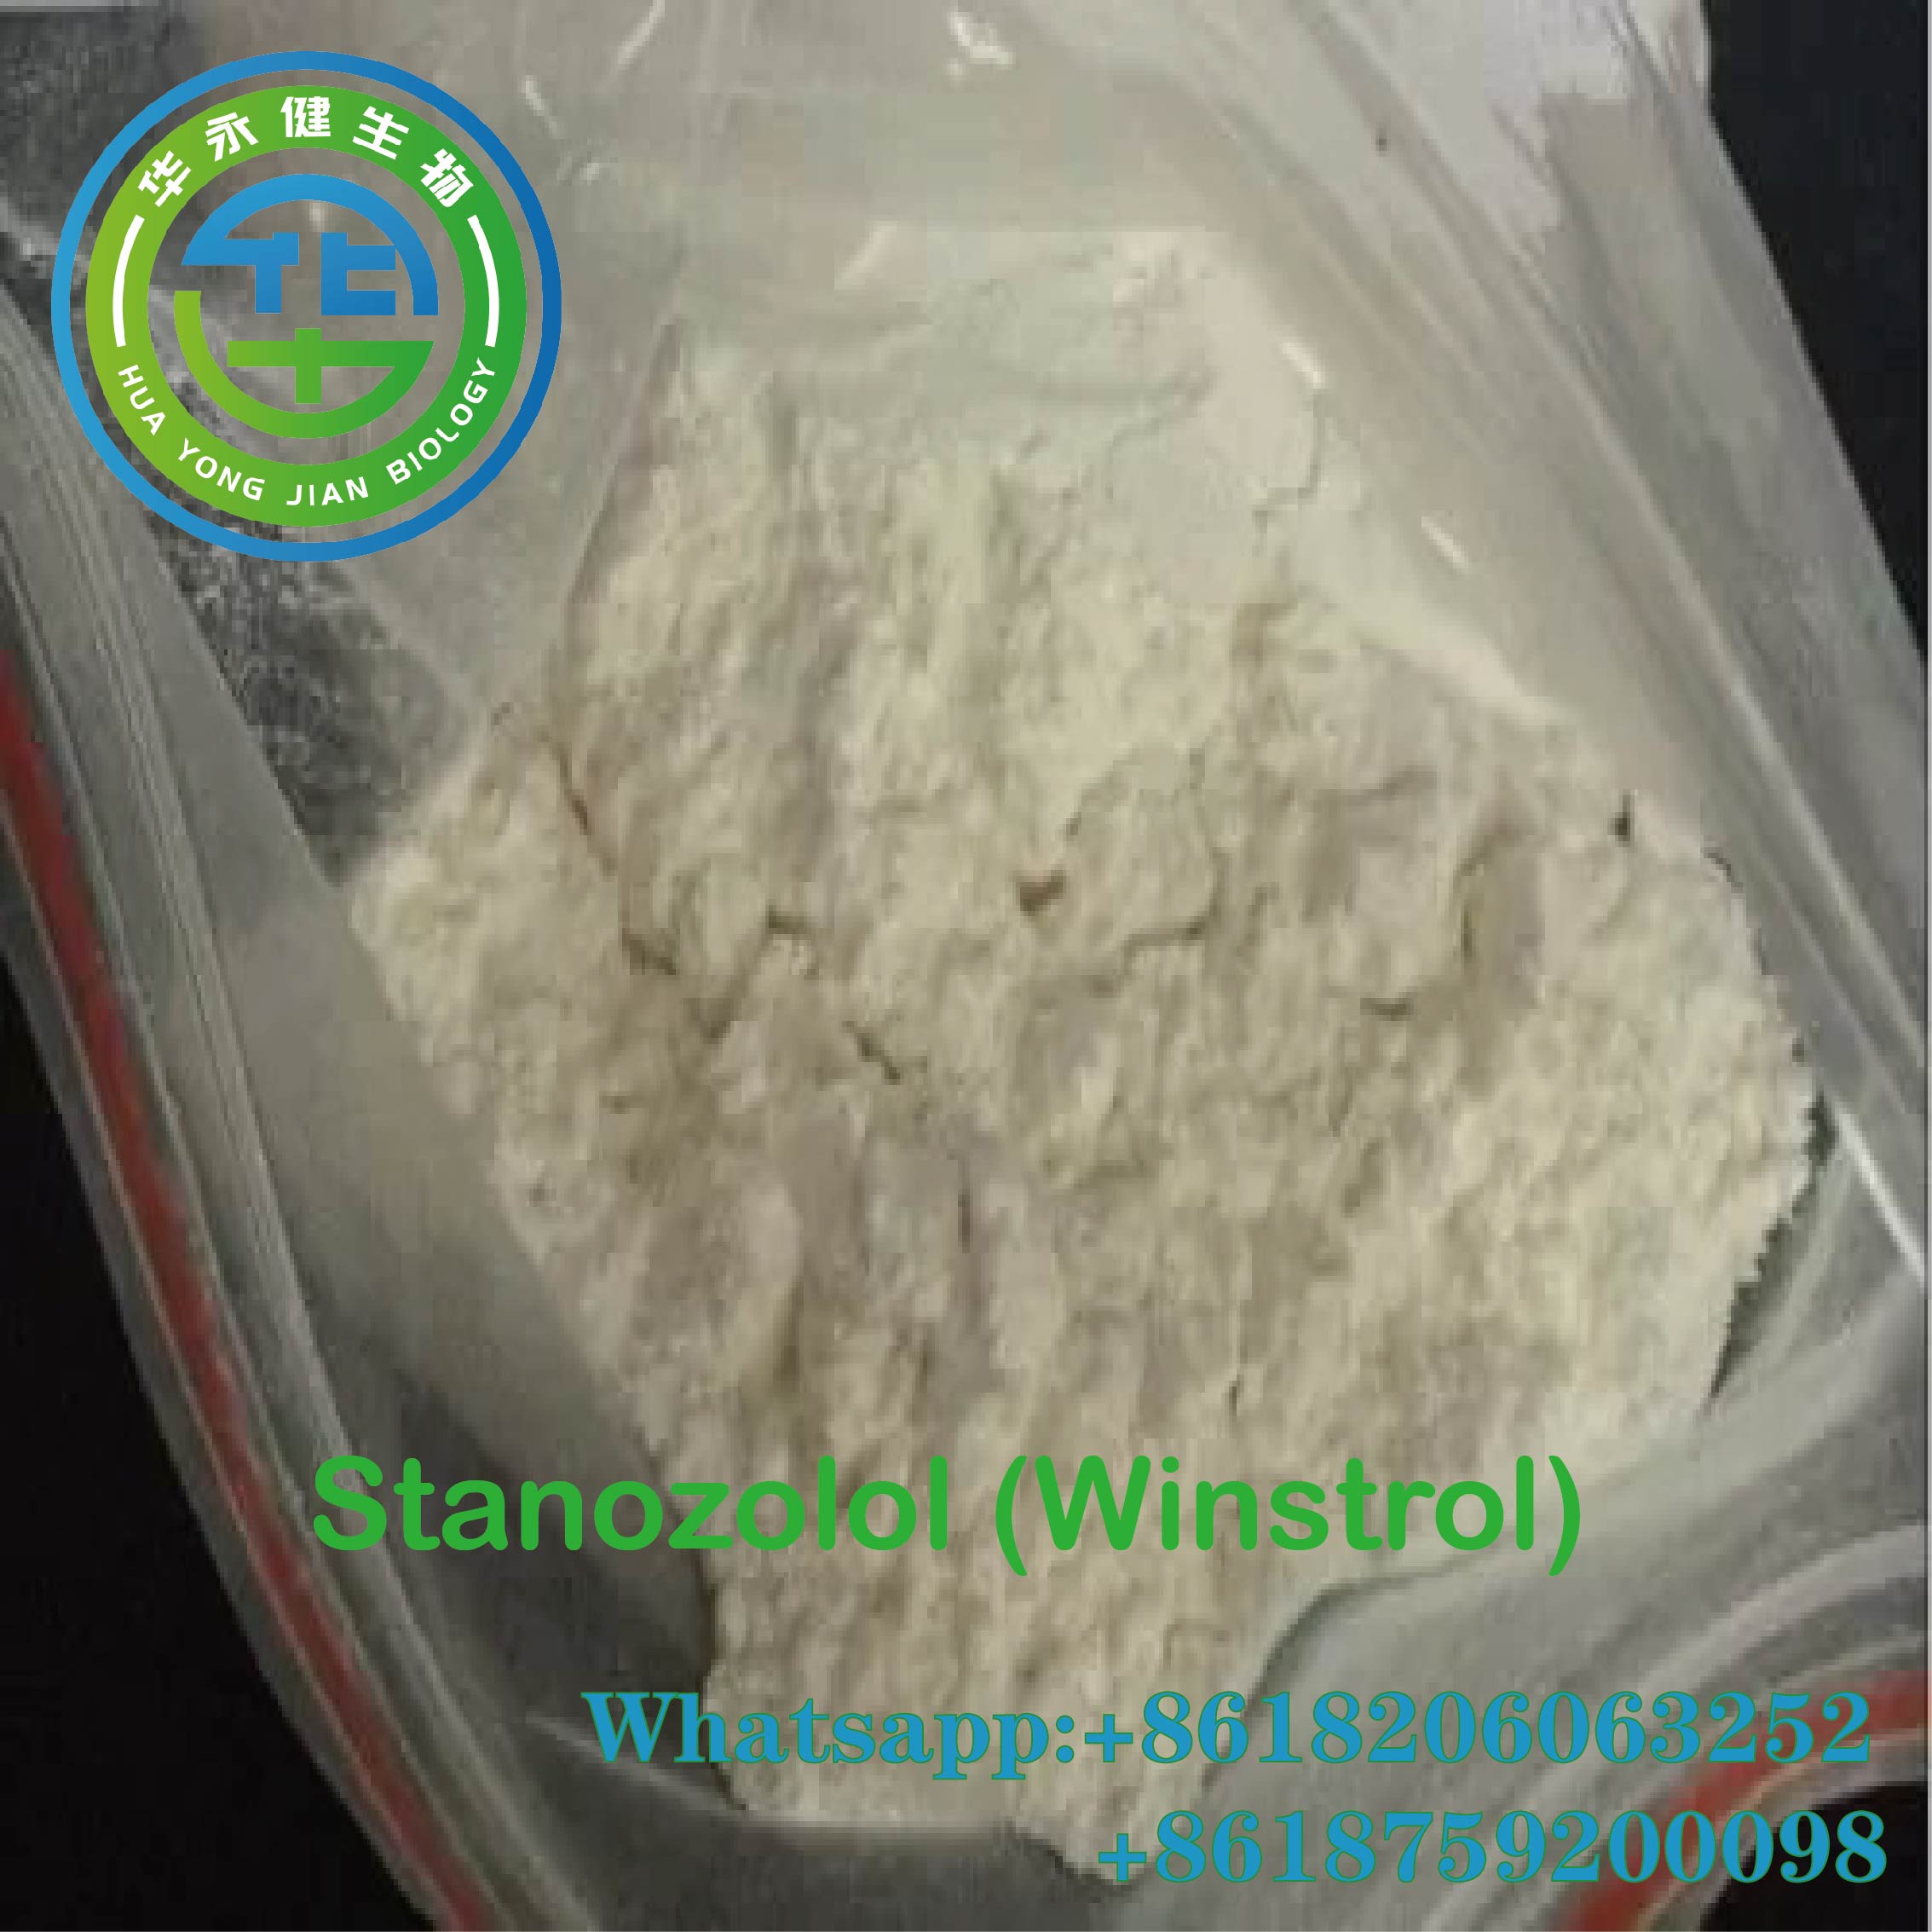 Paypal Bitcoin Accepted Raw Powder Steroids Stanozolol (Winstrol) for Weight Loss CasNO. 10418-03-8